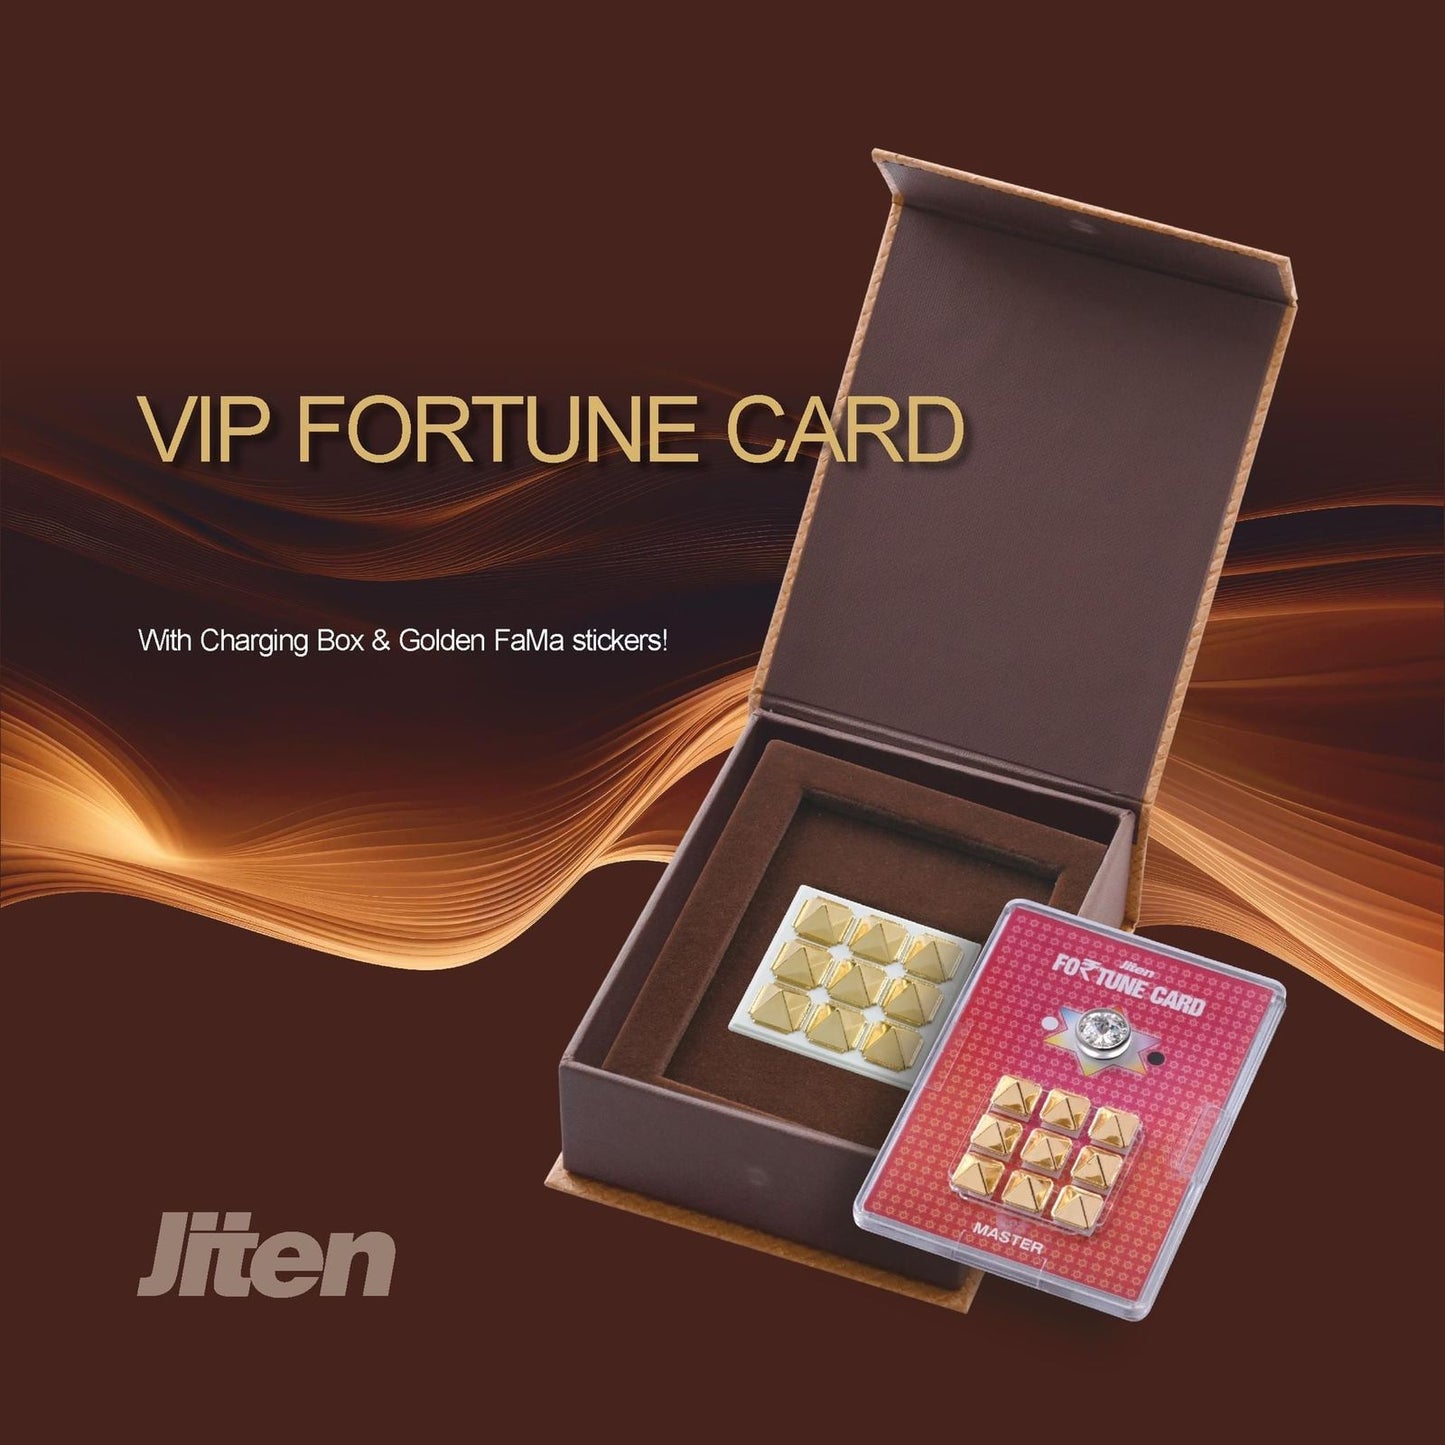 VIP Fortune Card Charger